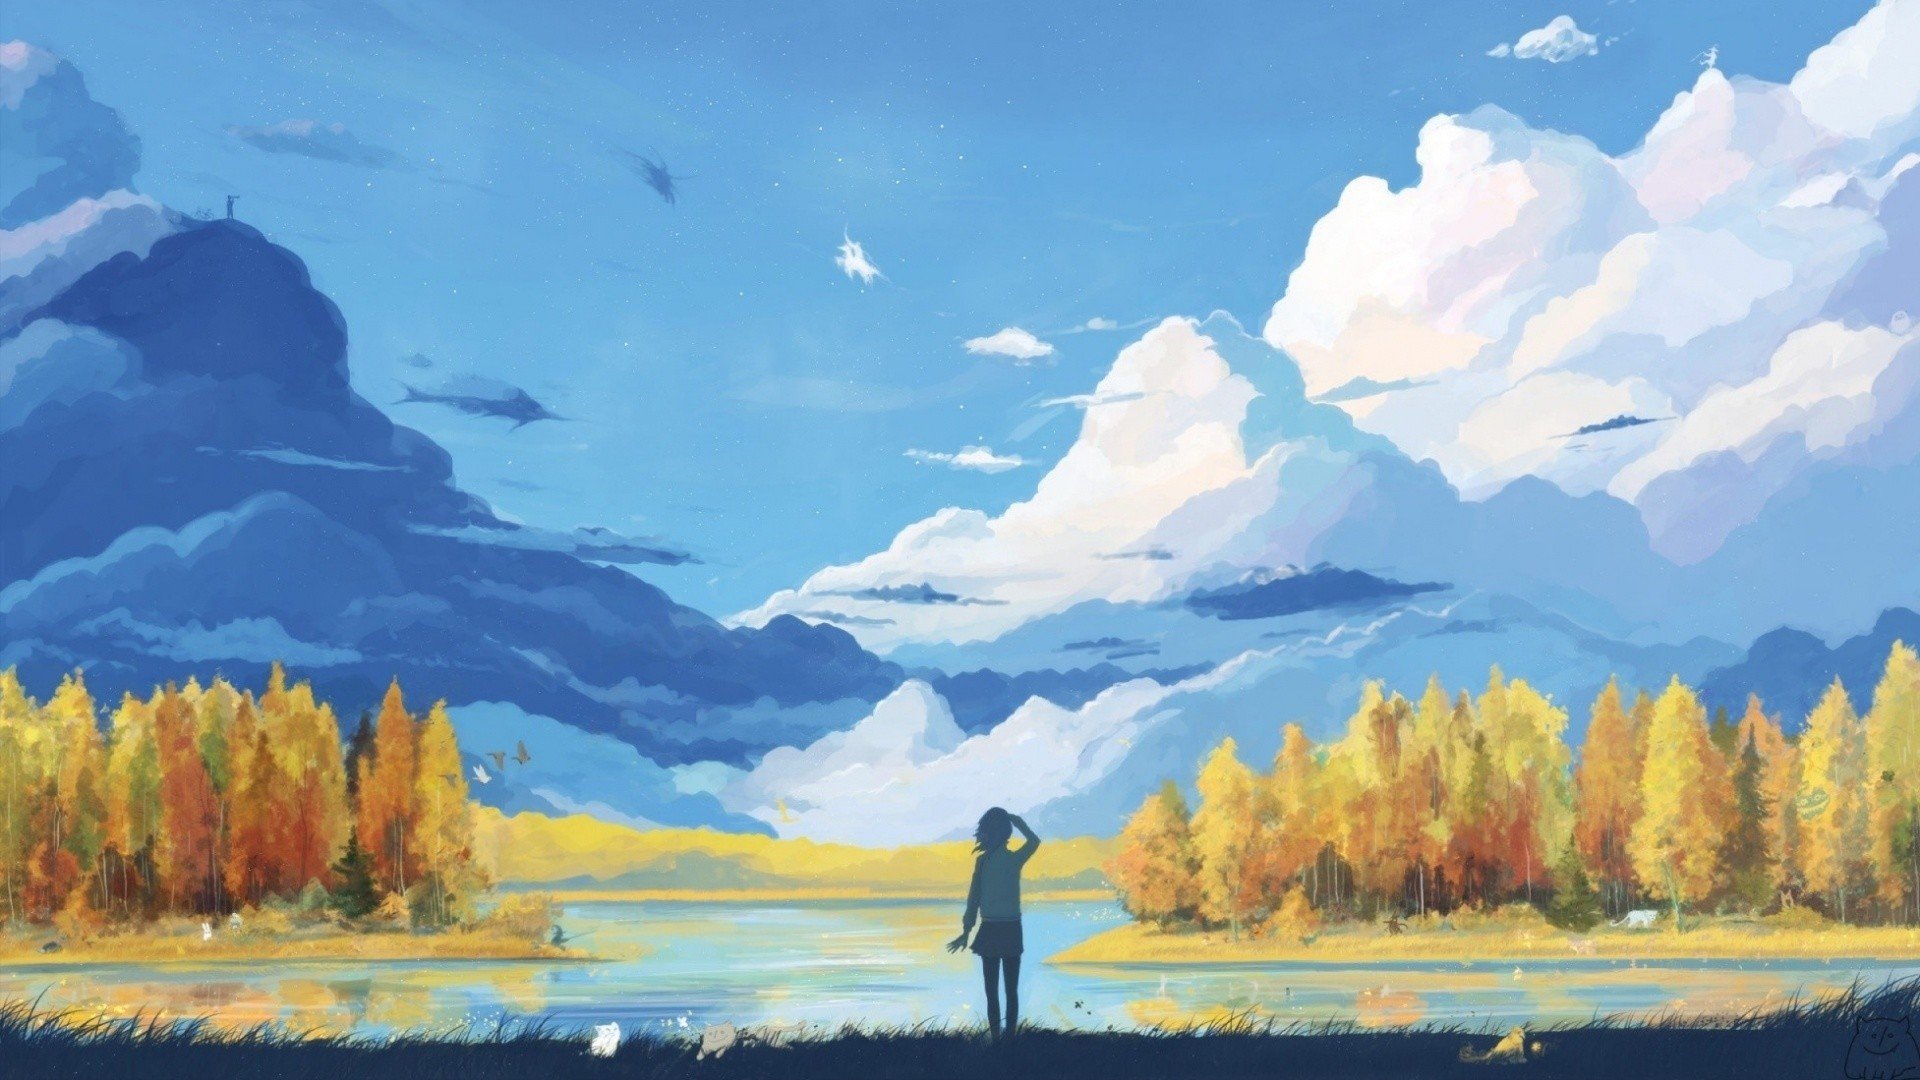 Free download 69 Anime Scenery Wallpaper [1920x1080] for your Desktop, Mobile & Tablet. Explore Cool Anime Landscape Wallpaper. Cool Anime Landscape Wallpaper, Cool Landscape Wallpaper, Cool Anime Background